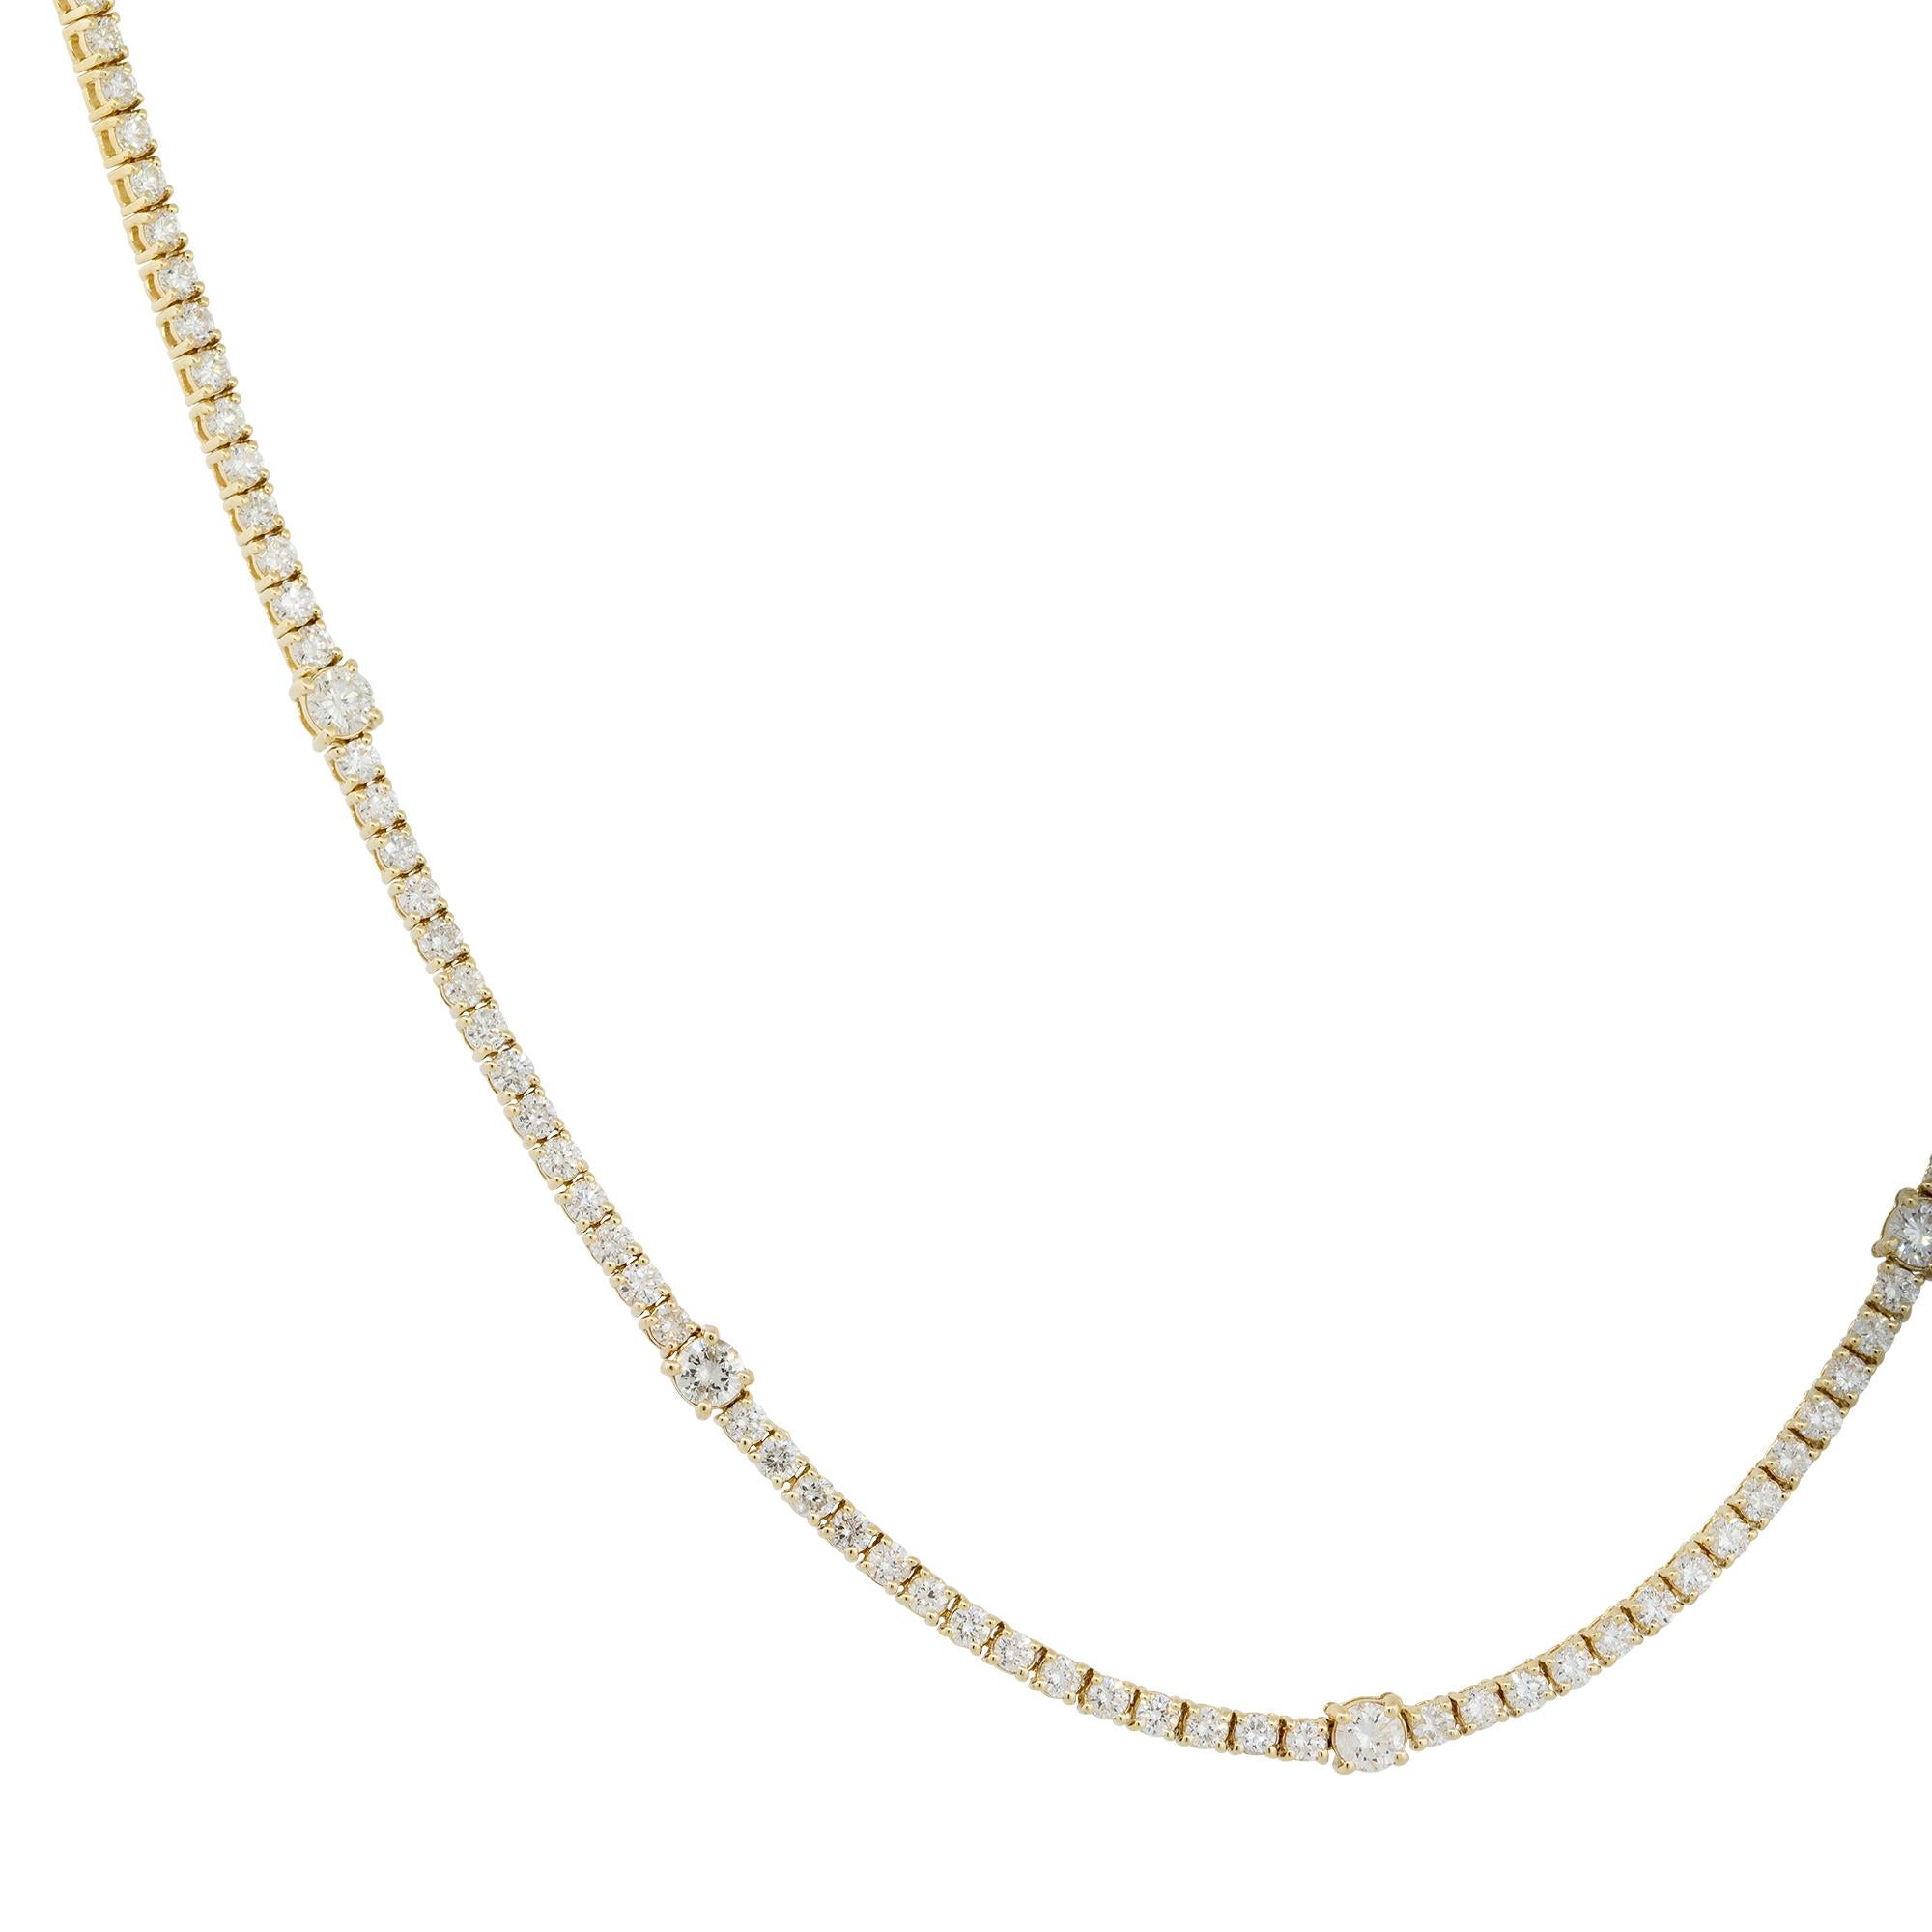 14k Yellow Gold 7.20ctw Diamond Tennis Diamond Station Necklace

Material: 14k Yellow Gold
Diamond Details: Approximately 7.20ctw of Round Brilliant Diamonds. There are 5 larger Diamond stations
Fastening: Tongue in Box Clasp
Measurements: 19